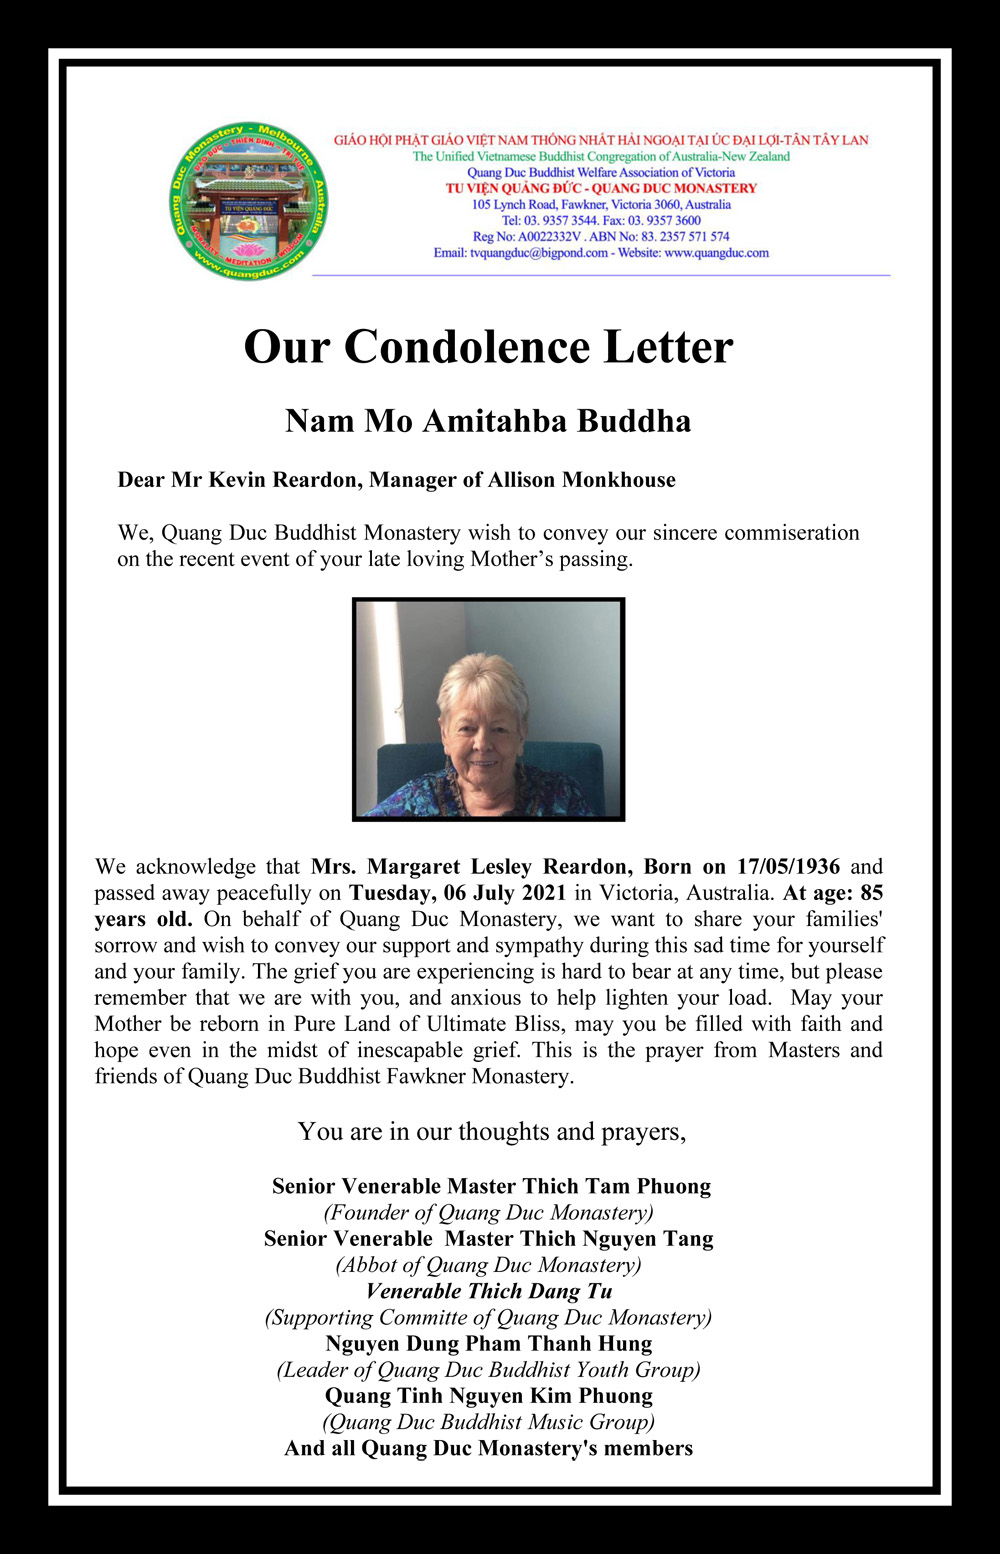 Our Condolence Letter_Mr Kevin-2